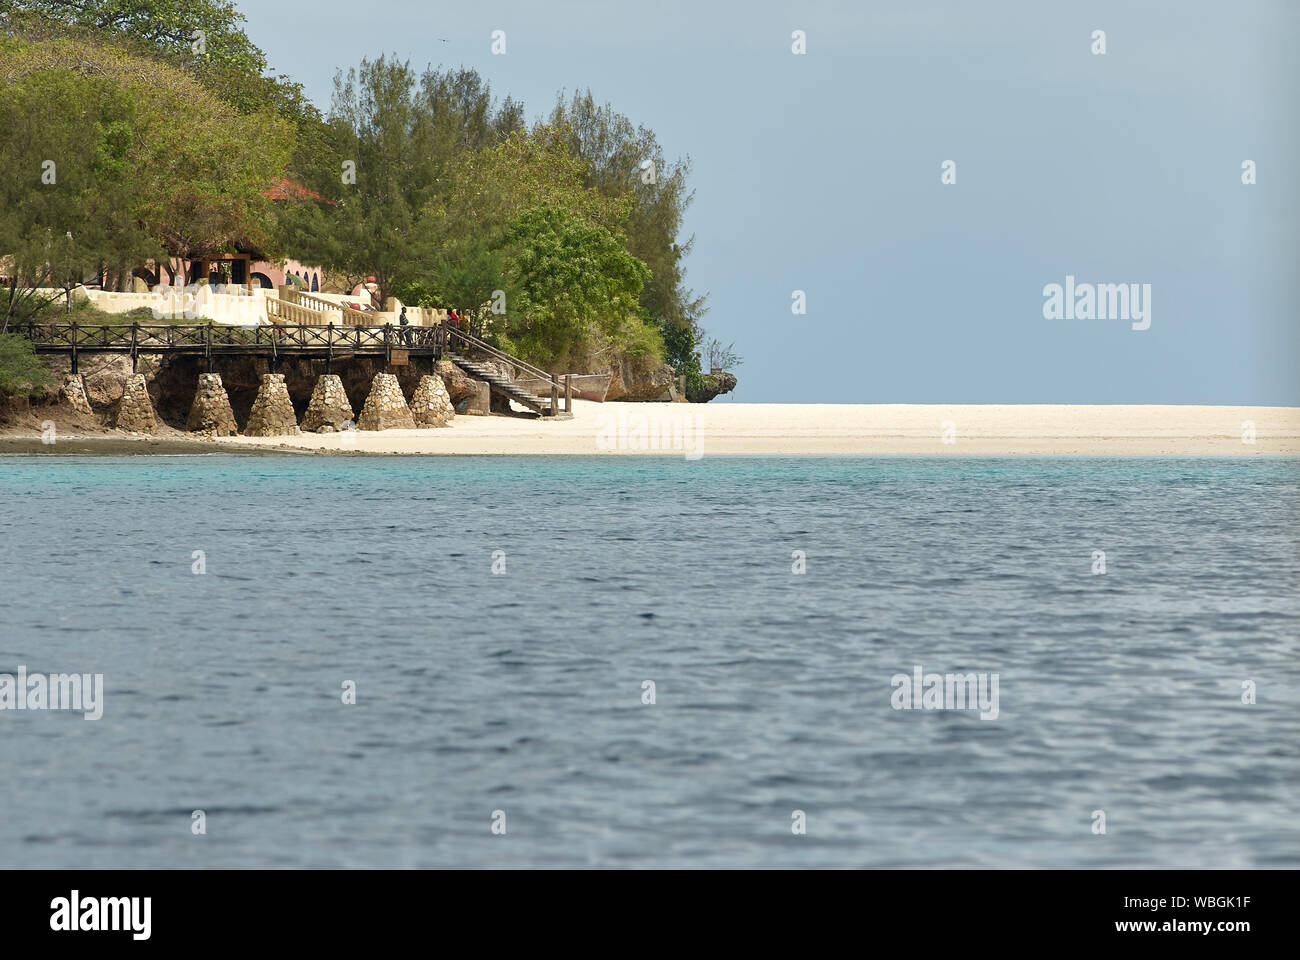 The 'how-terminal' on Prison Island or Changuu Island as it is also called (Zanzibar) Stock Photo